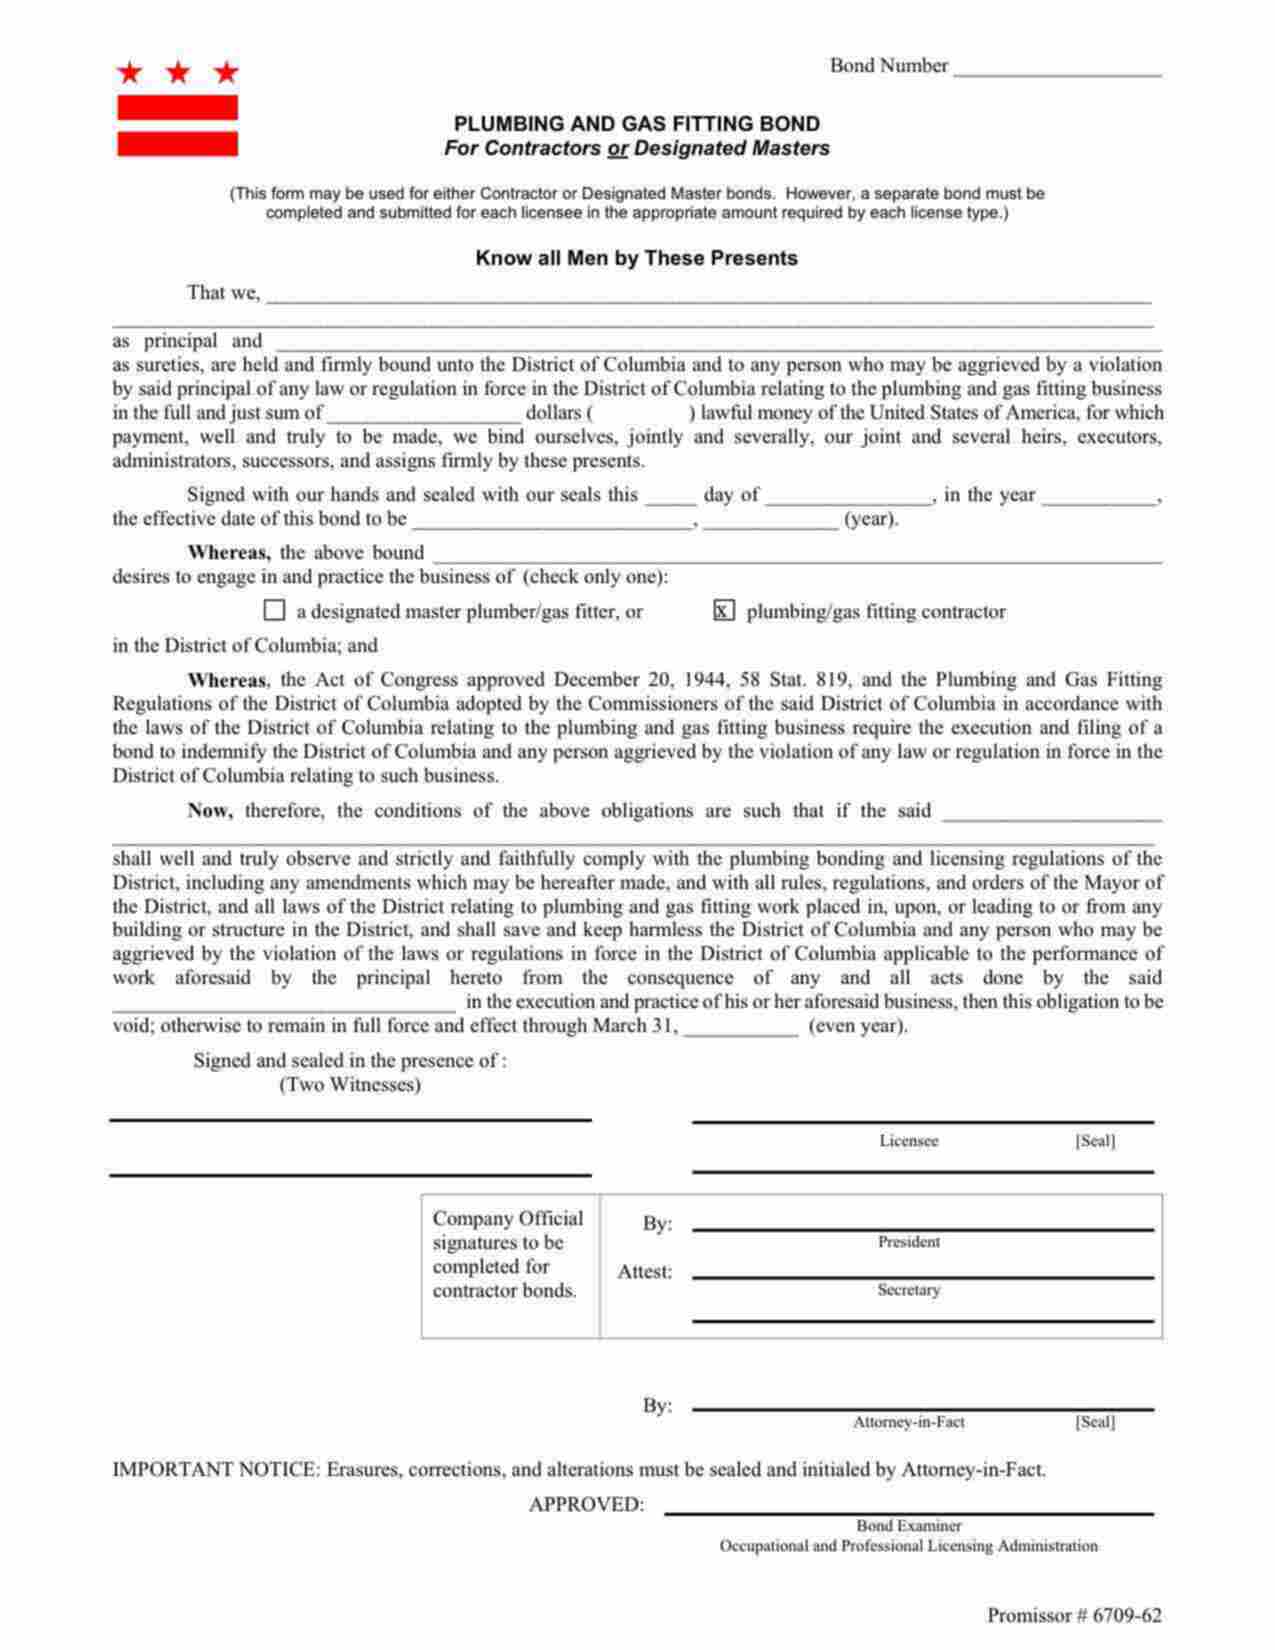 District of Columbia Plumbing/Gas Fitting Contractor Bond Form